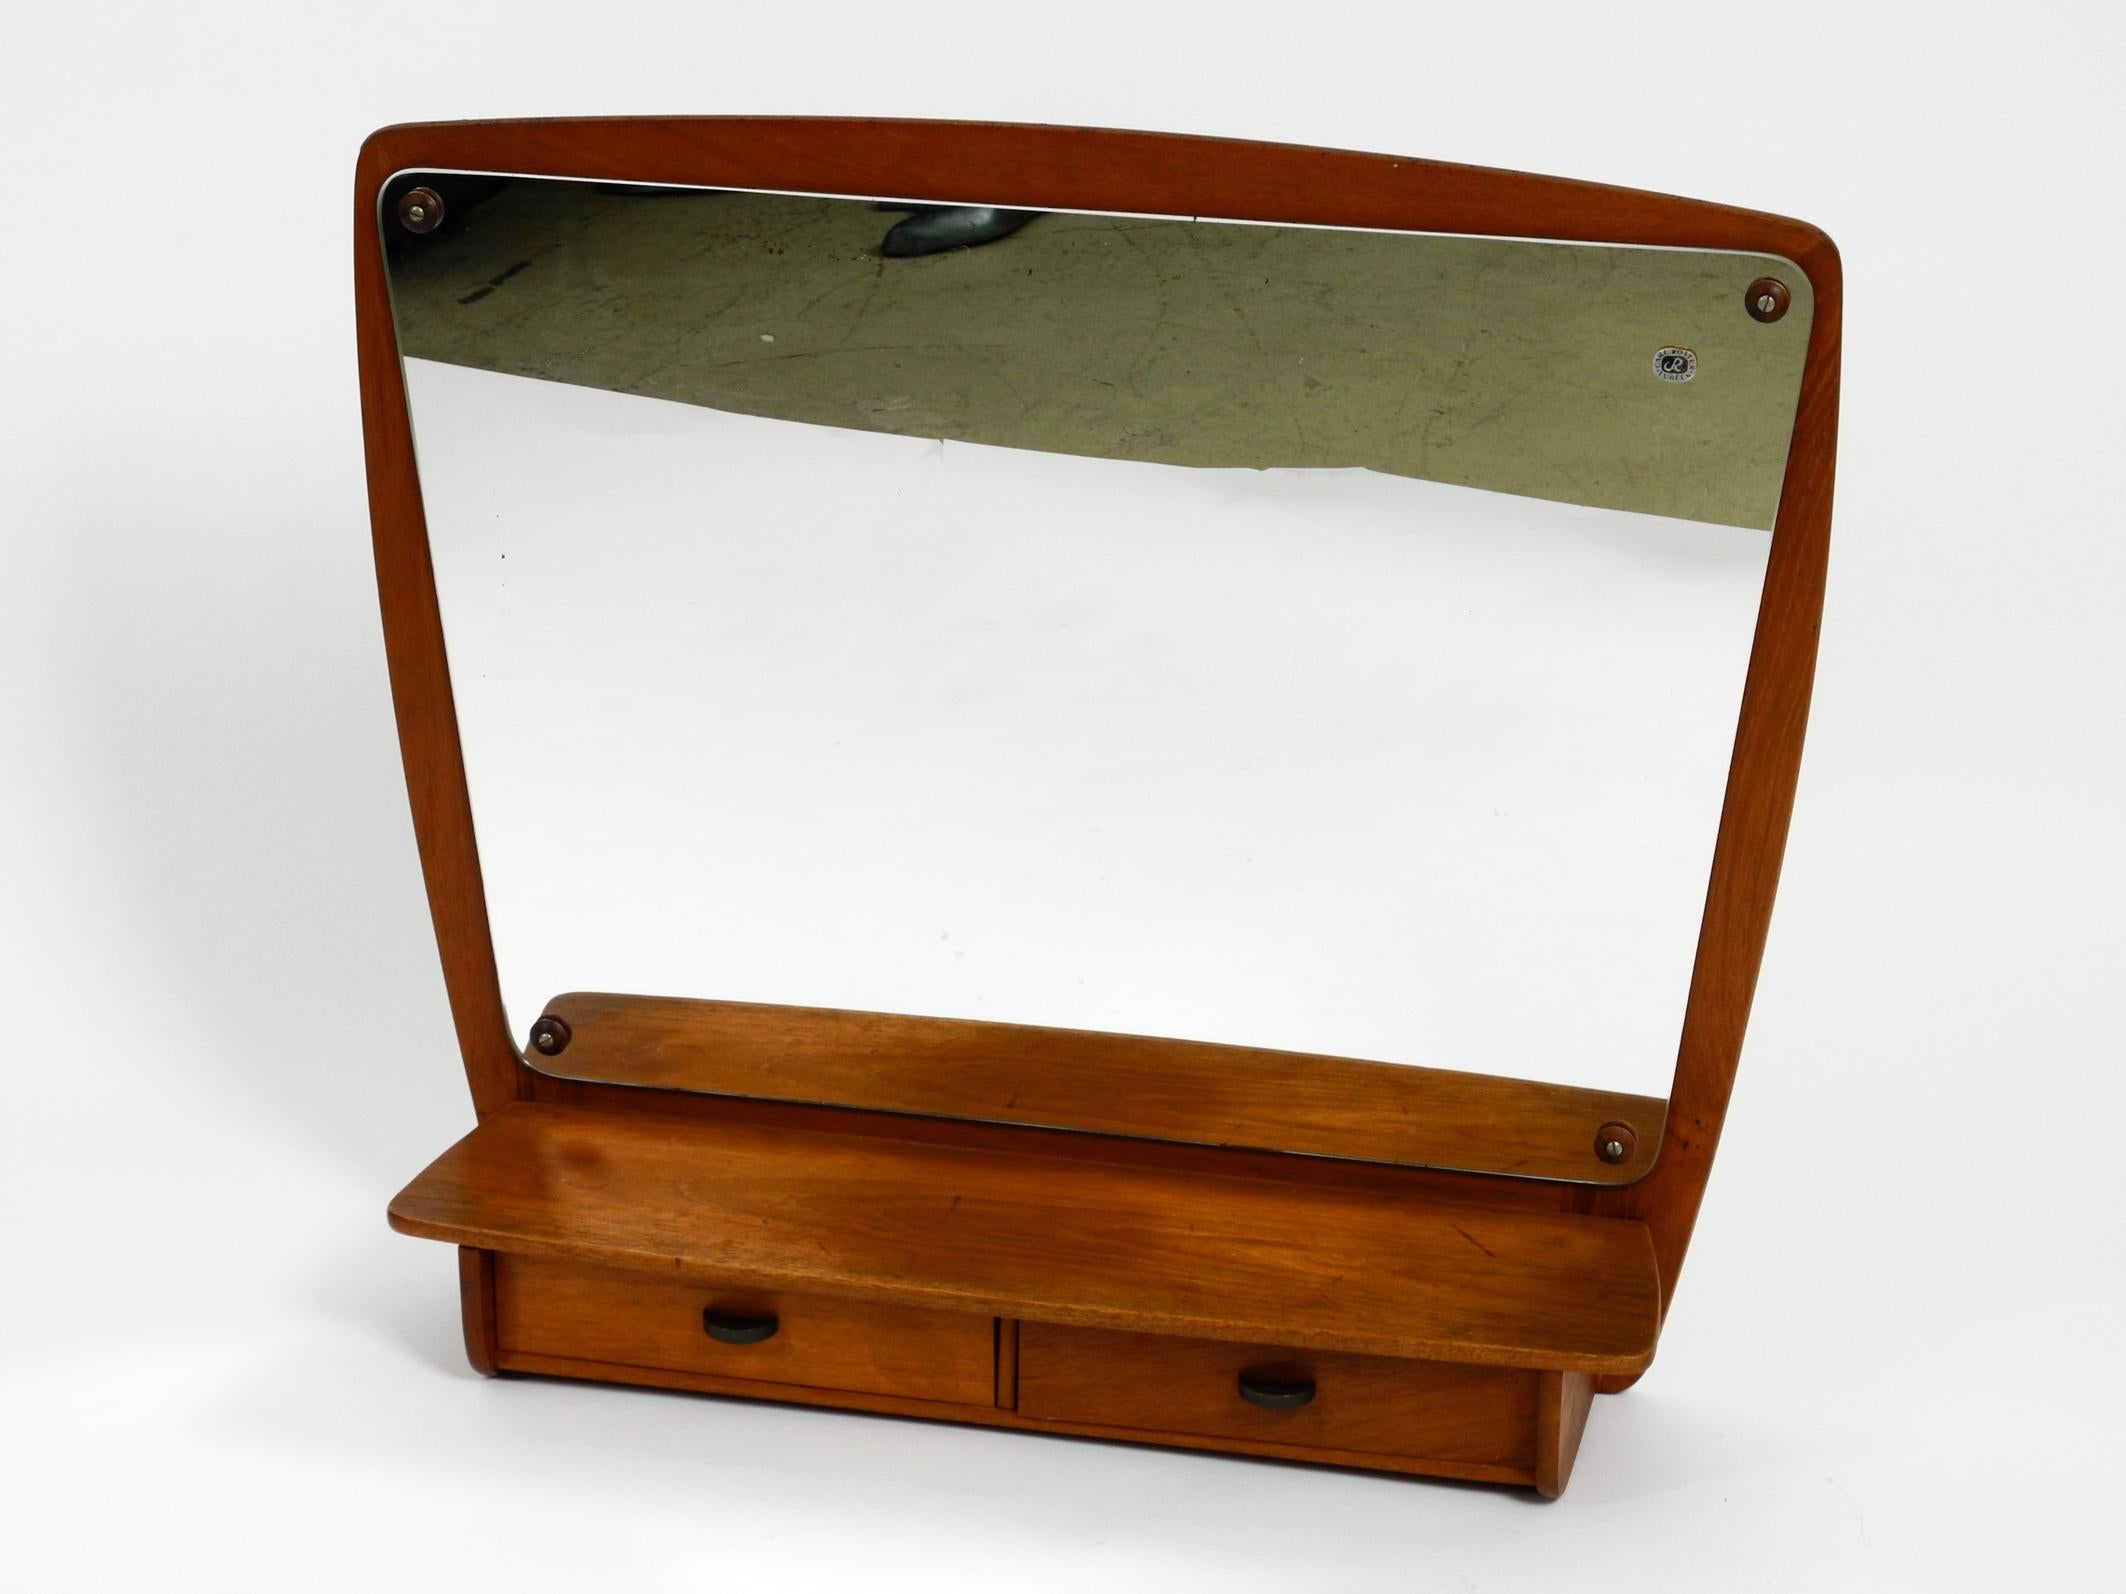 Extraordinary Danish mid century teak wall mirror with shelf and drawers. 
The thick original mirror glass is from the well-known glass manufacturer Carl Rotter from Lübeck.
With original label on the mirror.
Mirror is screwed to the teak frame